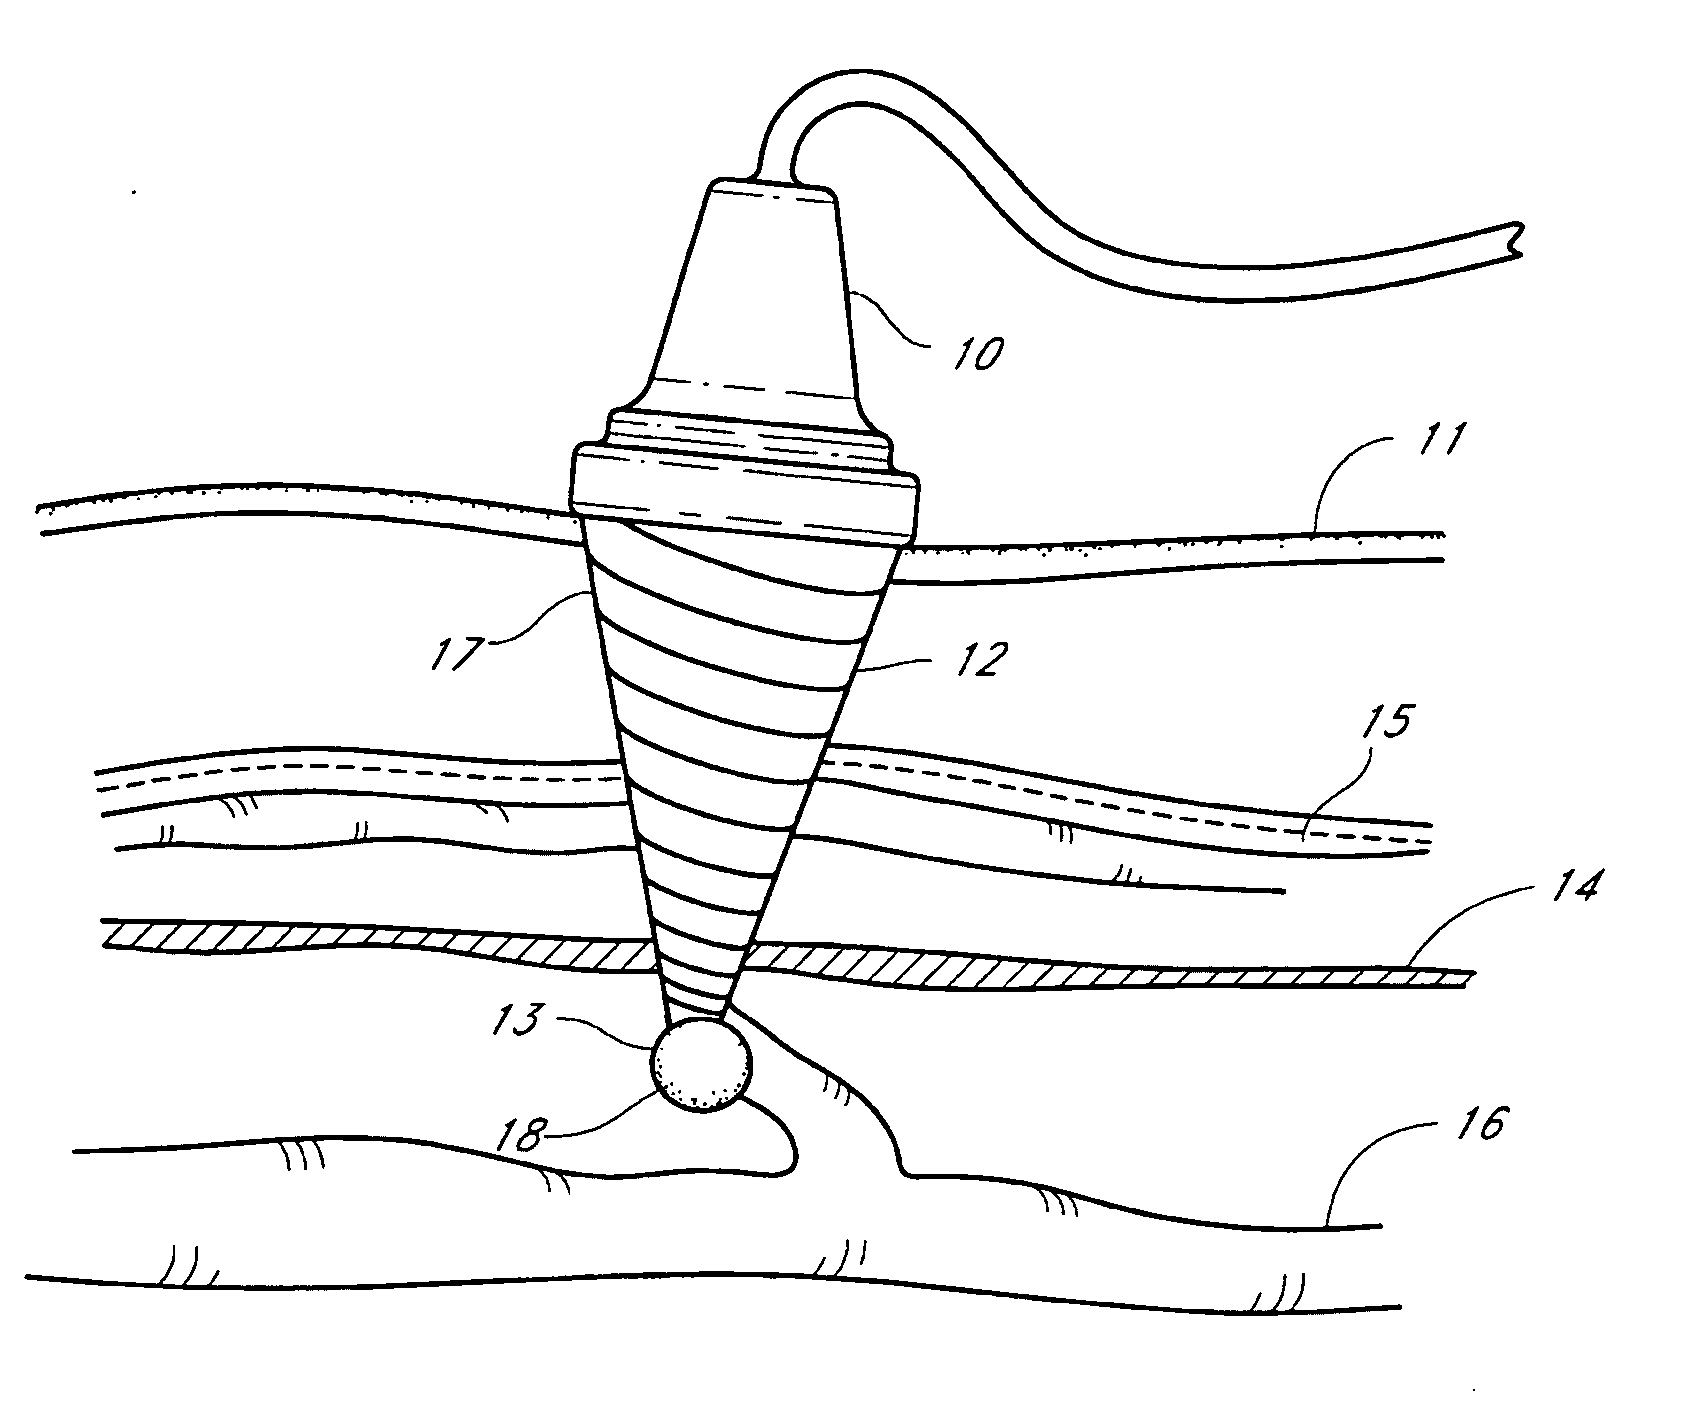 Method and apparatus for varicose vein treatment using acoustic hemostasis